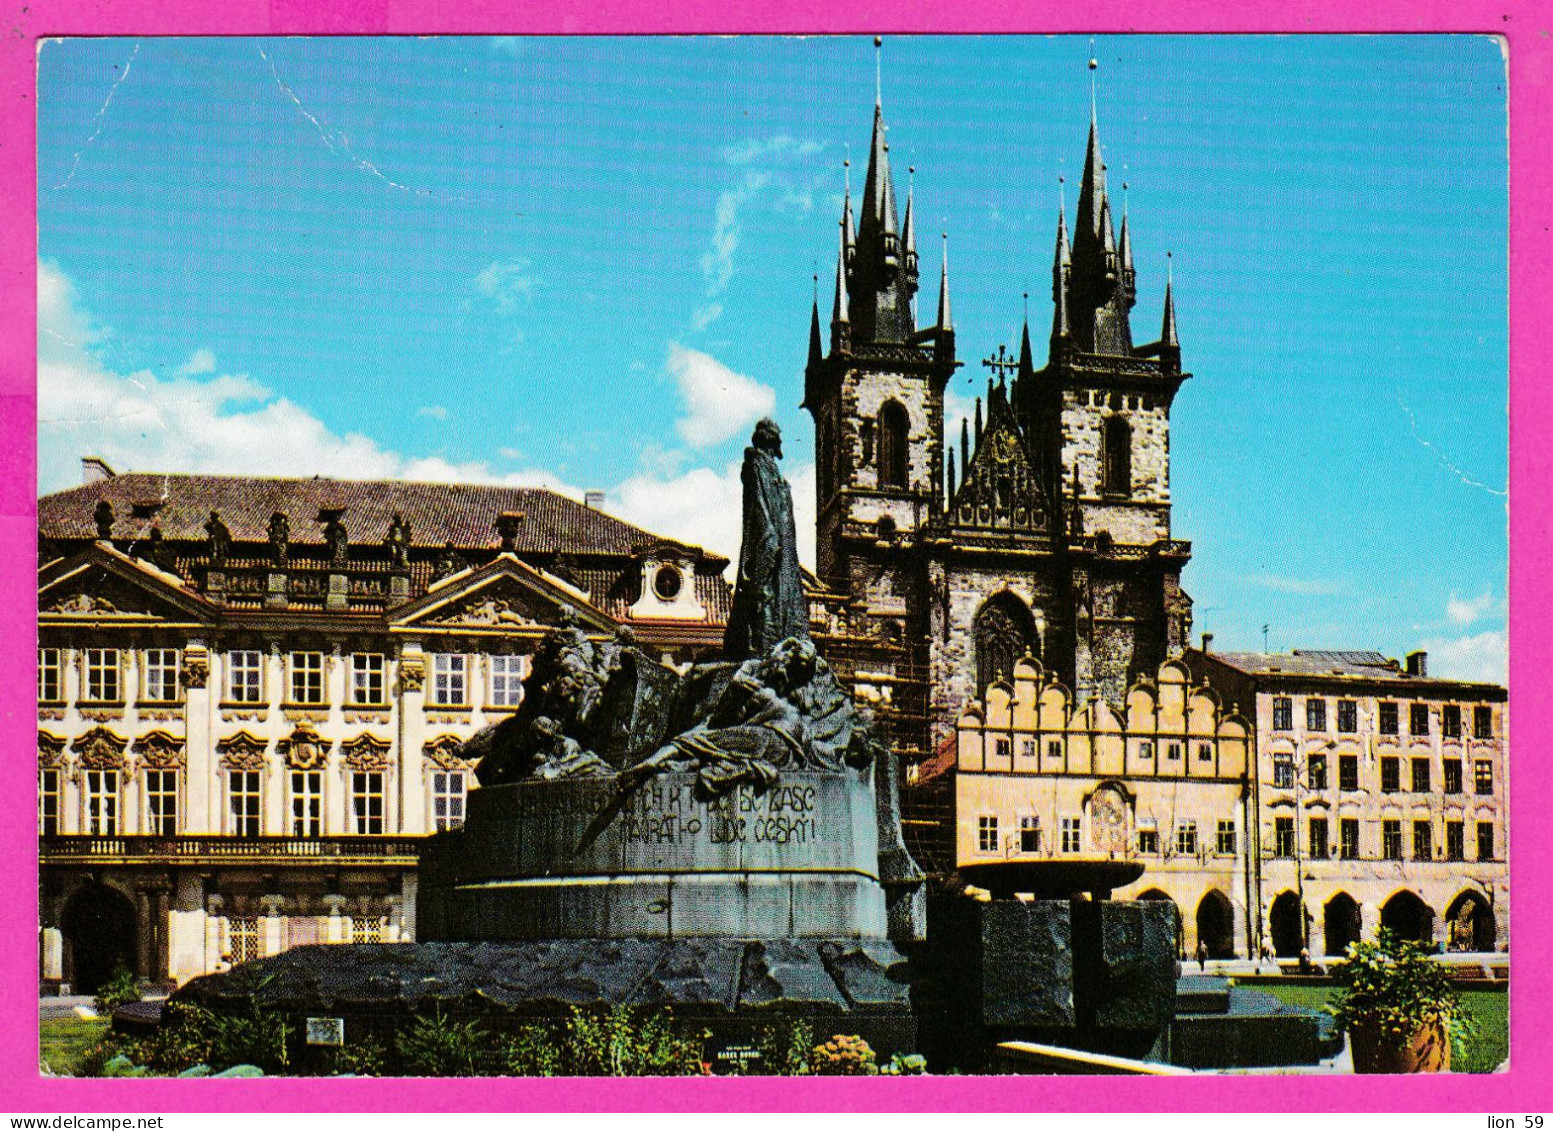 294705 / Czechoslovakia - Praha Church Of Our Lady Before Týn Monument PC 1974 USED 30h Postal Services Letter Bird - Covers & Documents